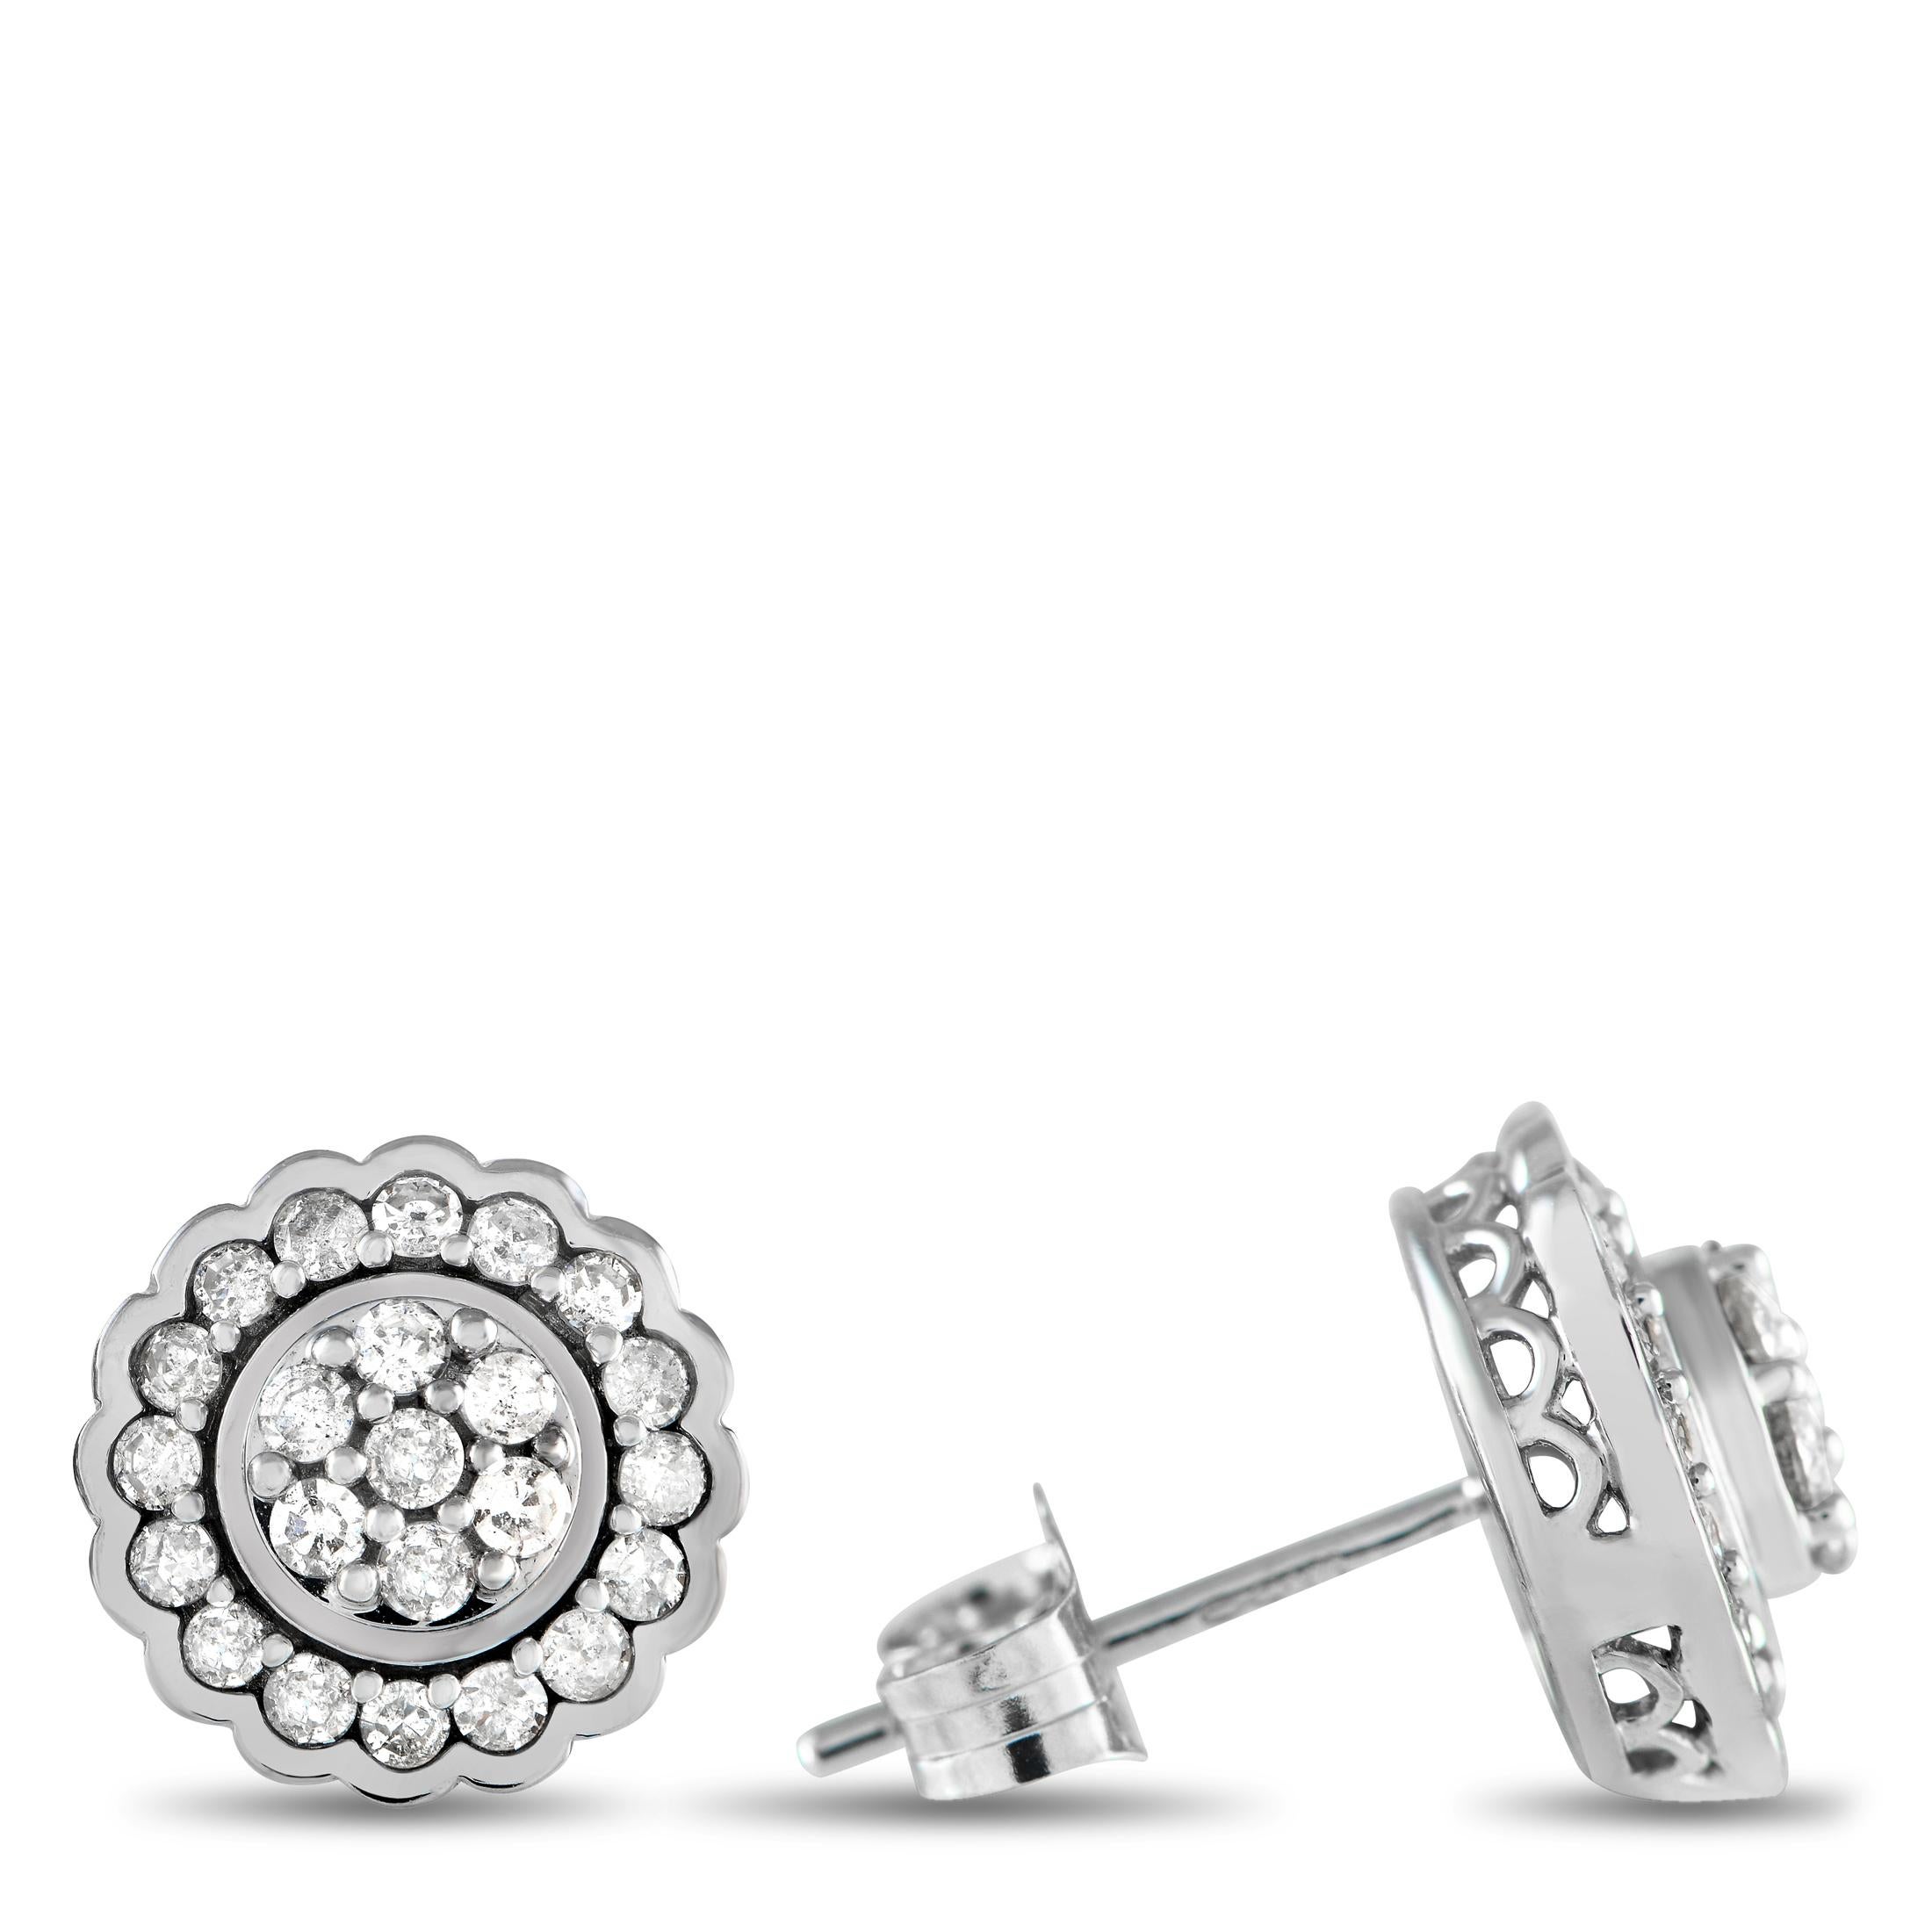 Gorgeous and timeless, these floral-inspired earrings pair beautifully with any outfit. They are made of 14K white gold and feature a scalloped outline filled with round diamonds, as well as a round bezel center encrusted with additional round